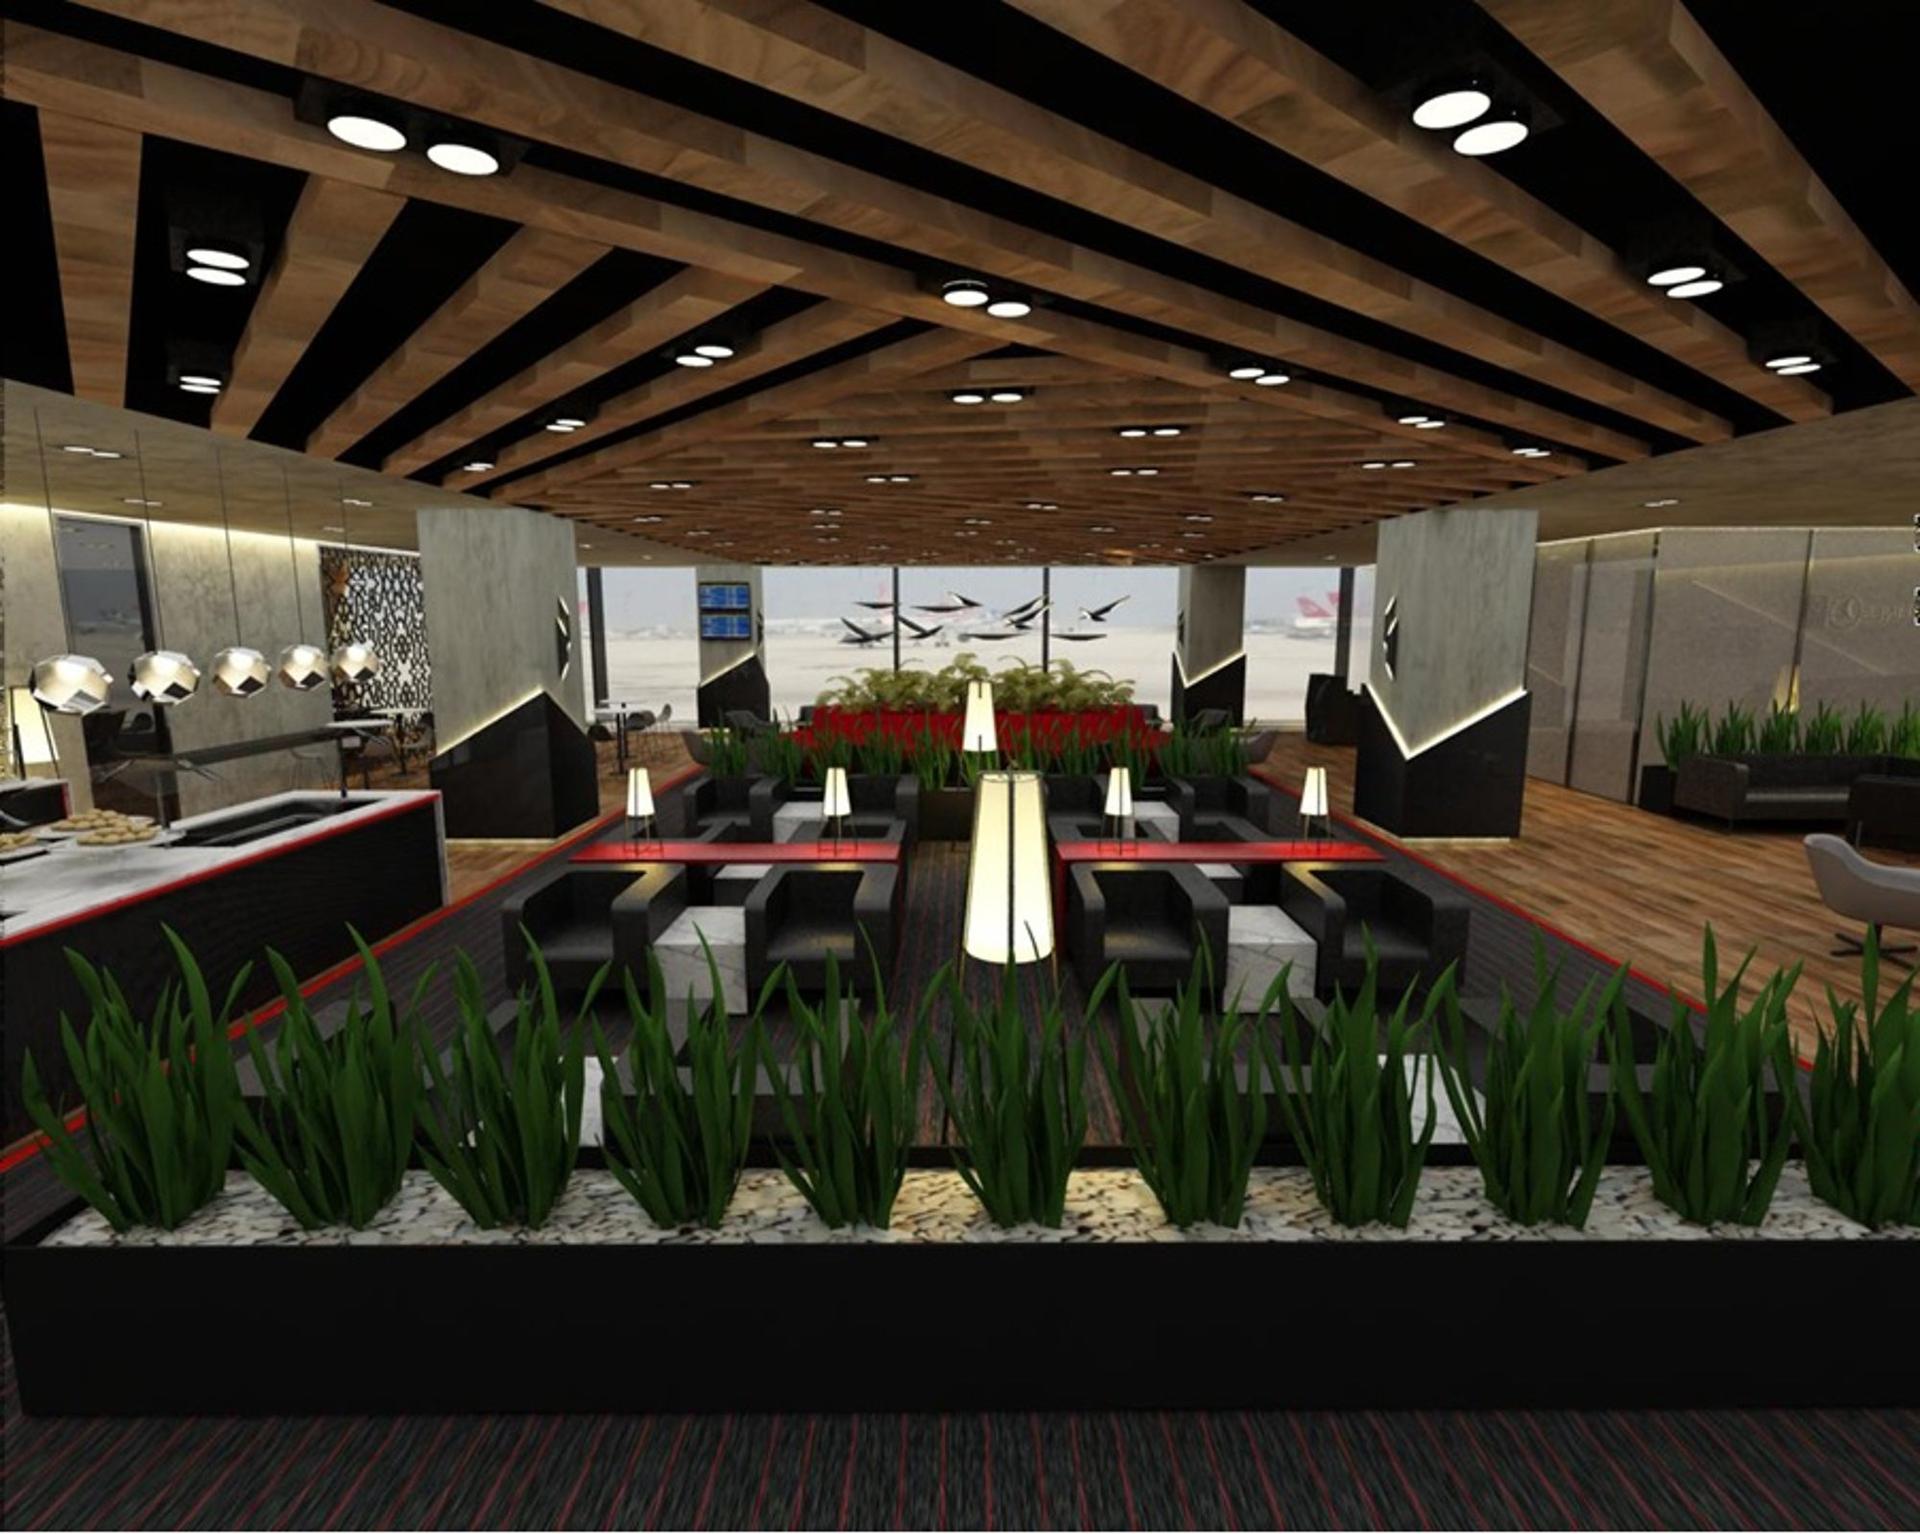 Turkish Airlines CIP Lounge (Business Lounge) image 7 of 27